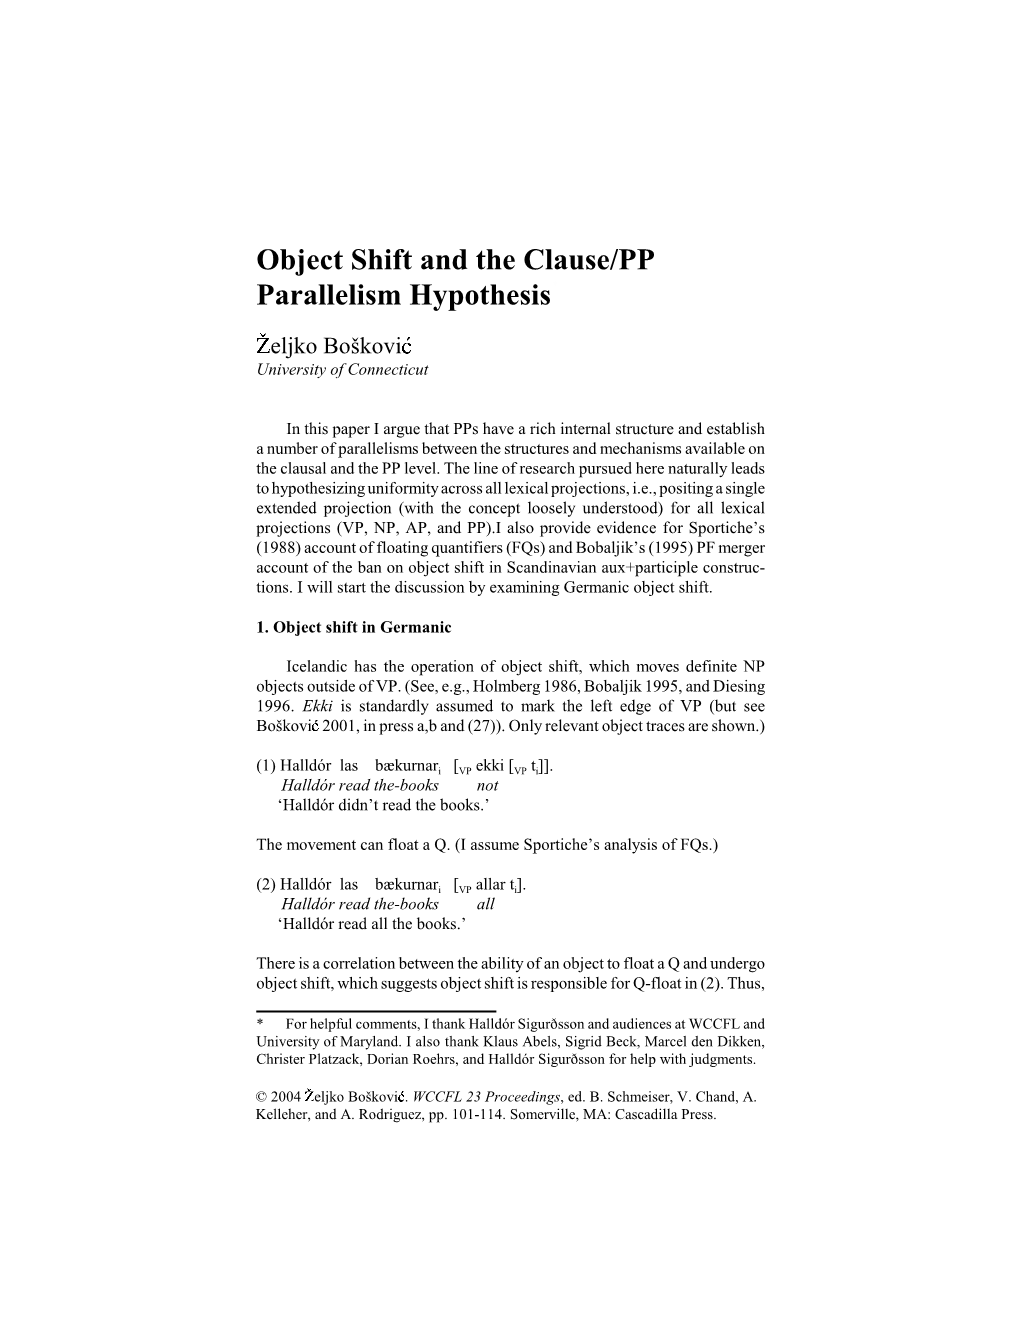 Object Shift and the Clause/PP Parallelism Hypothesis.Pdf